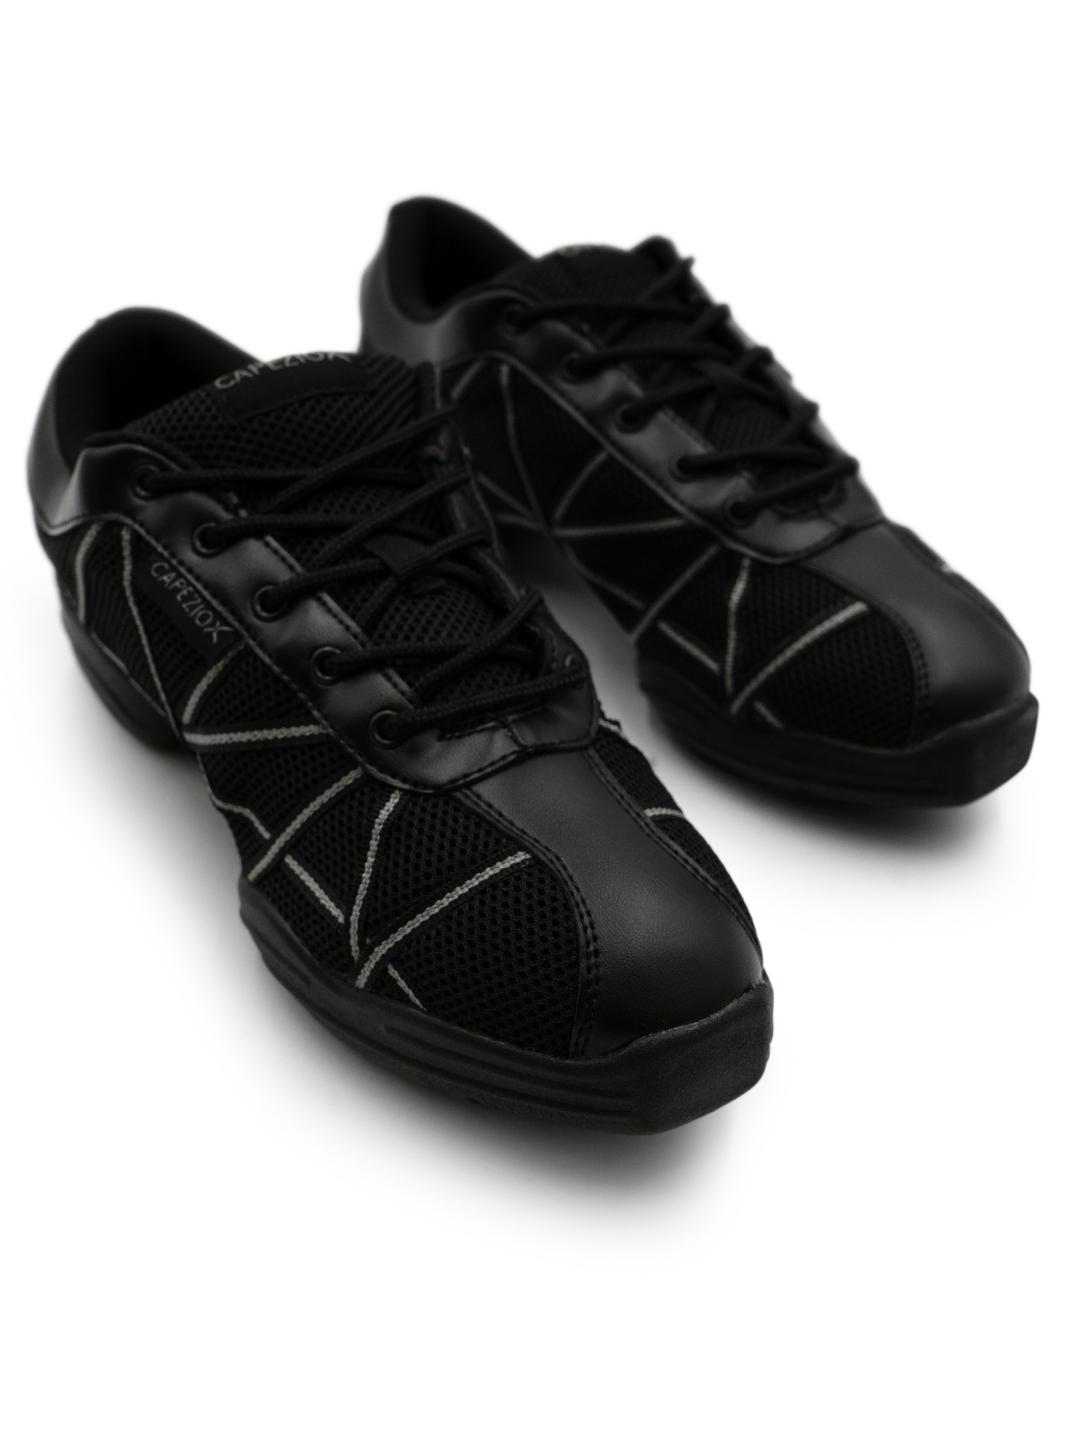 Sneakers For Man | Mens Sneakers For Sale Online | Buy Running Shoes For Men  In Capezio